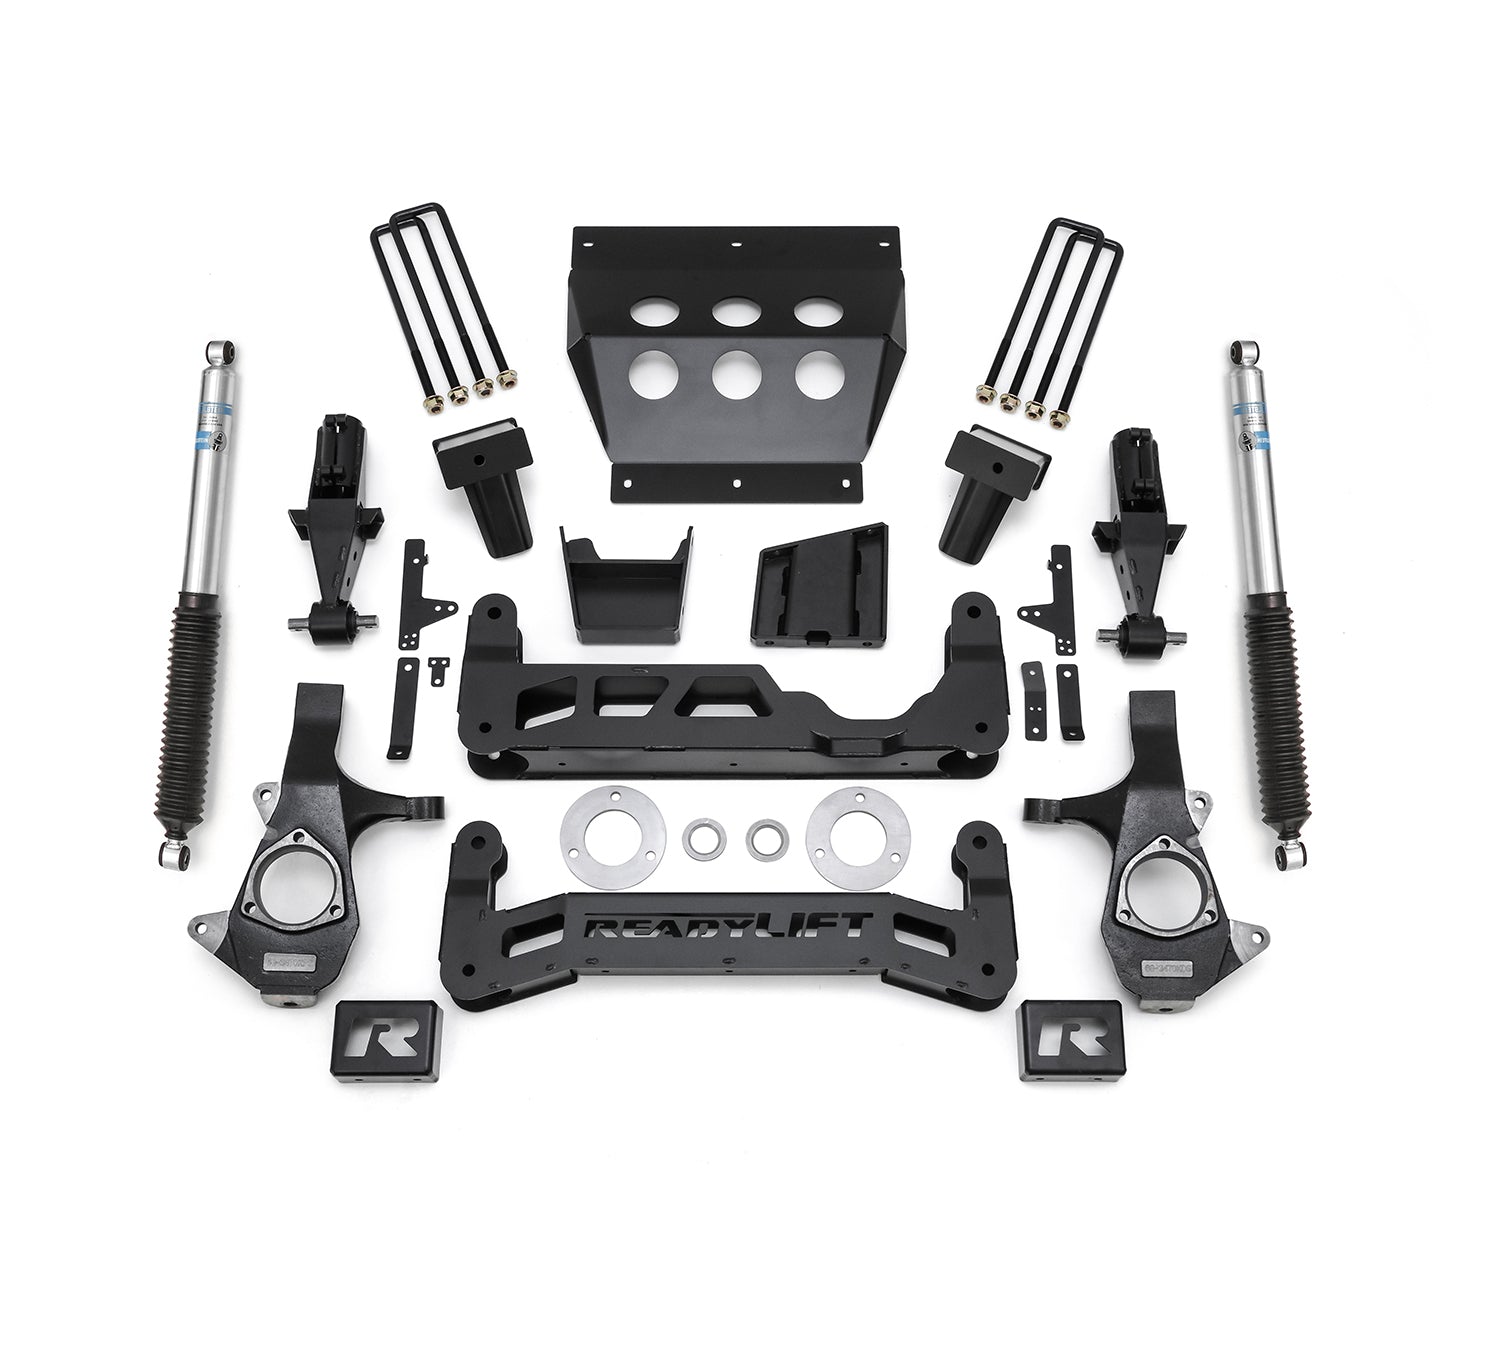 ReadyLift 44-3470 2014-2018 7'' Big Lift Kit for Aluminum OE Upper Control Arms with Bilstein Shocks